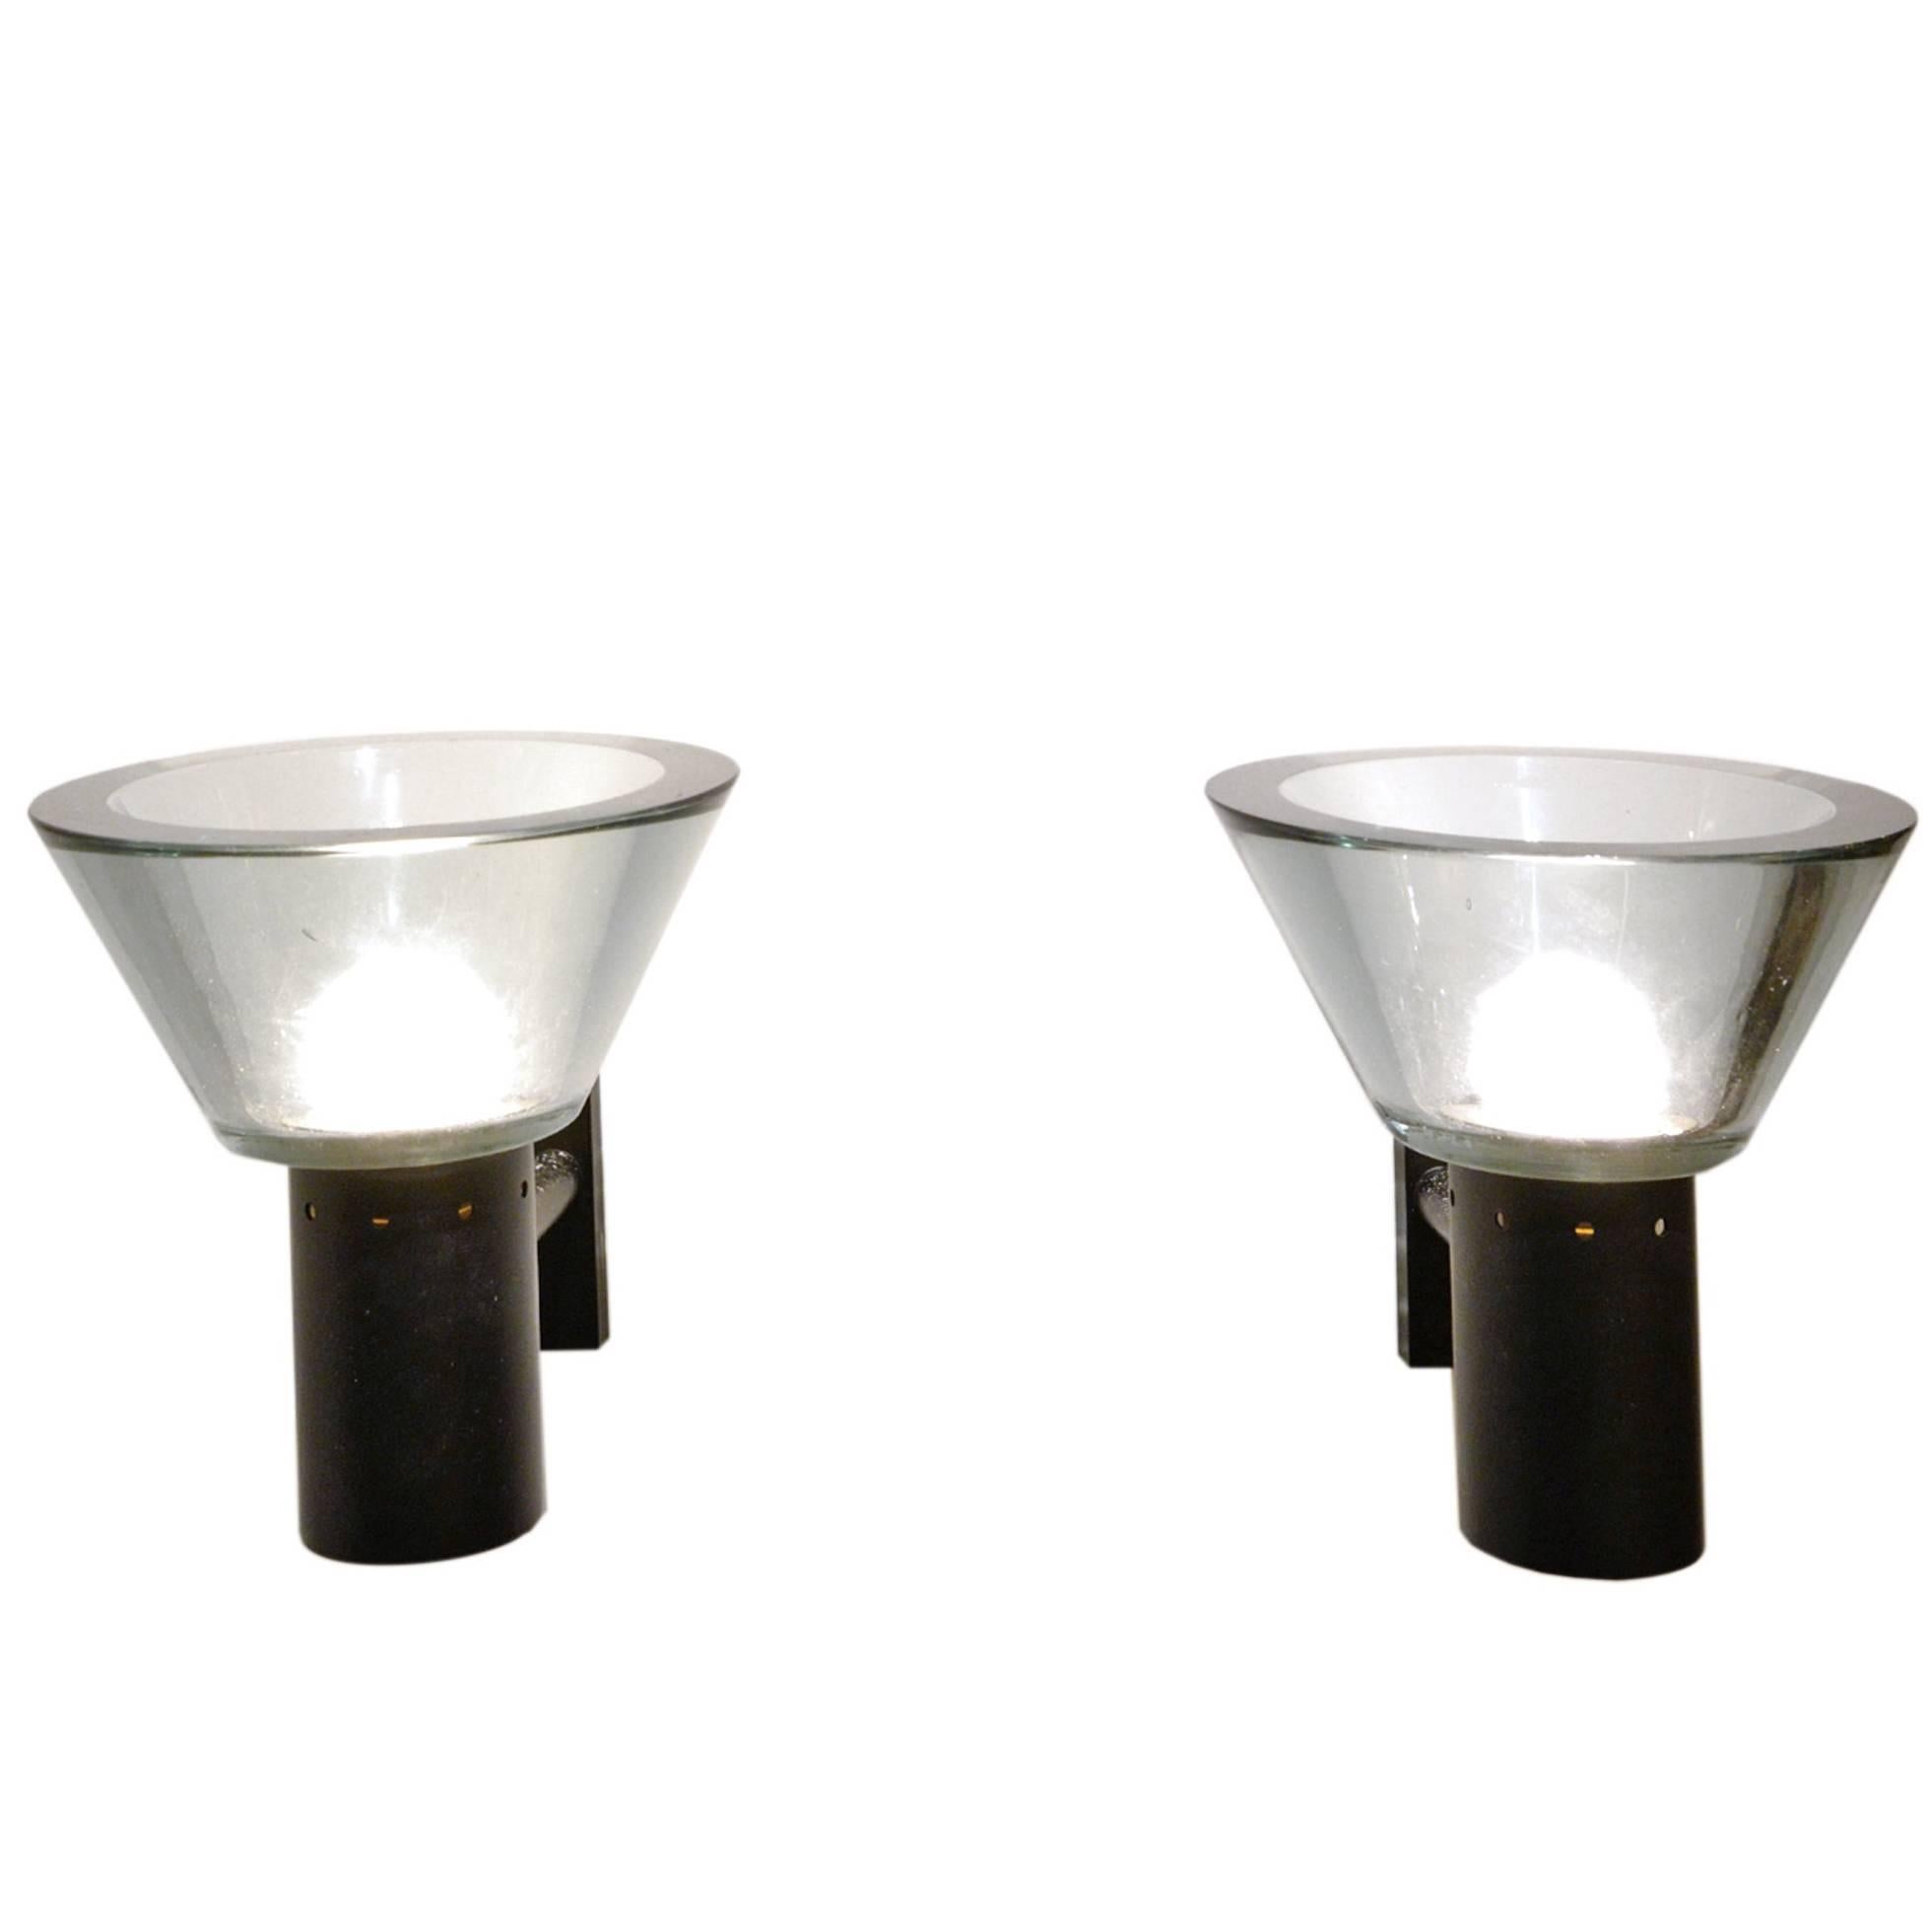 Seguso, Pair of Wall Lights in Glass and Lacquered Metal, circa 1950 For Sale